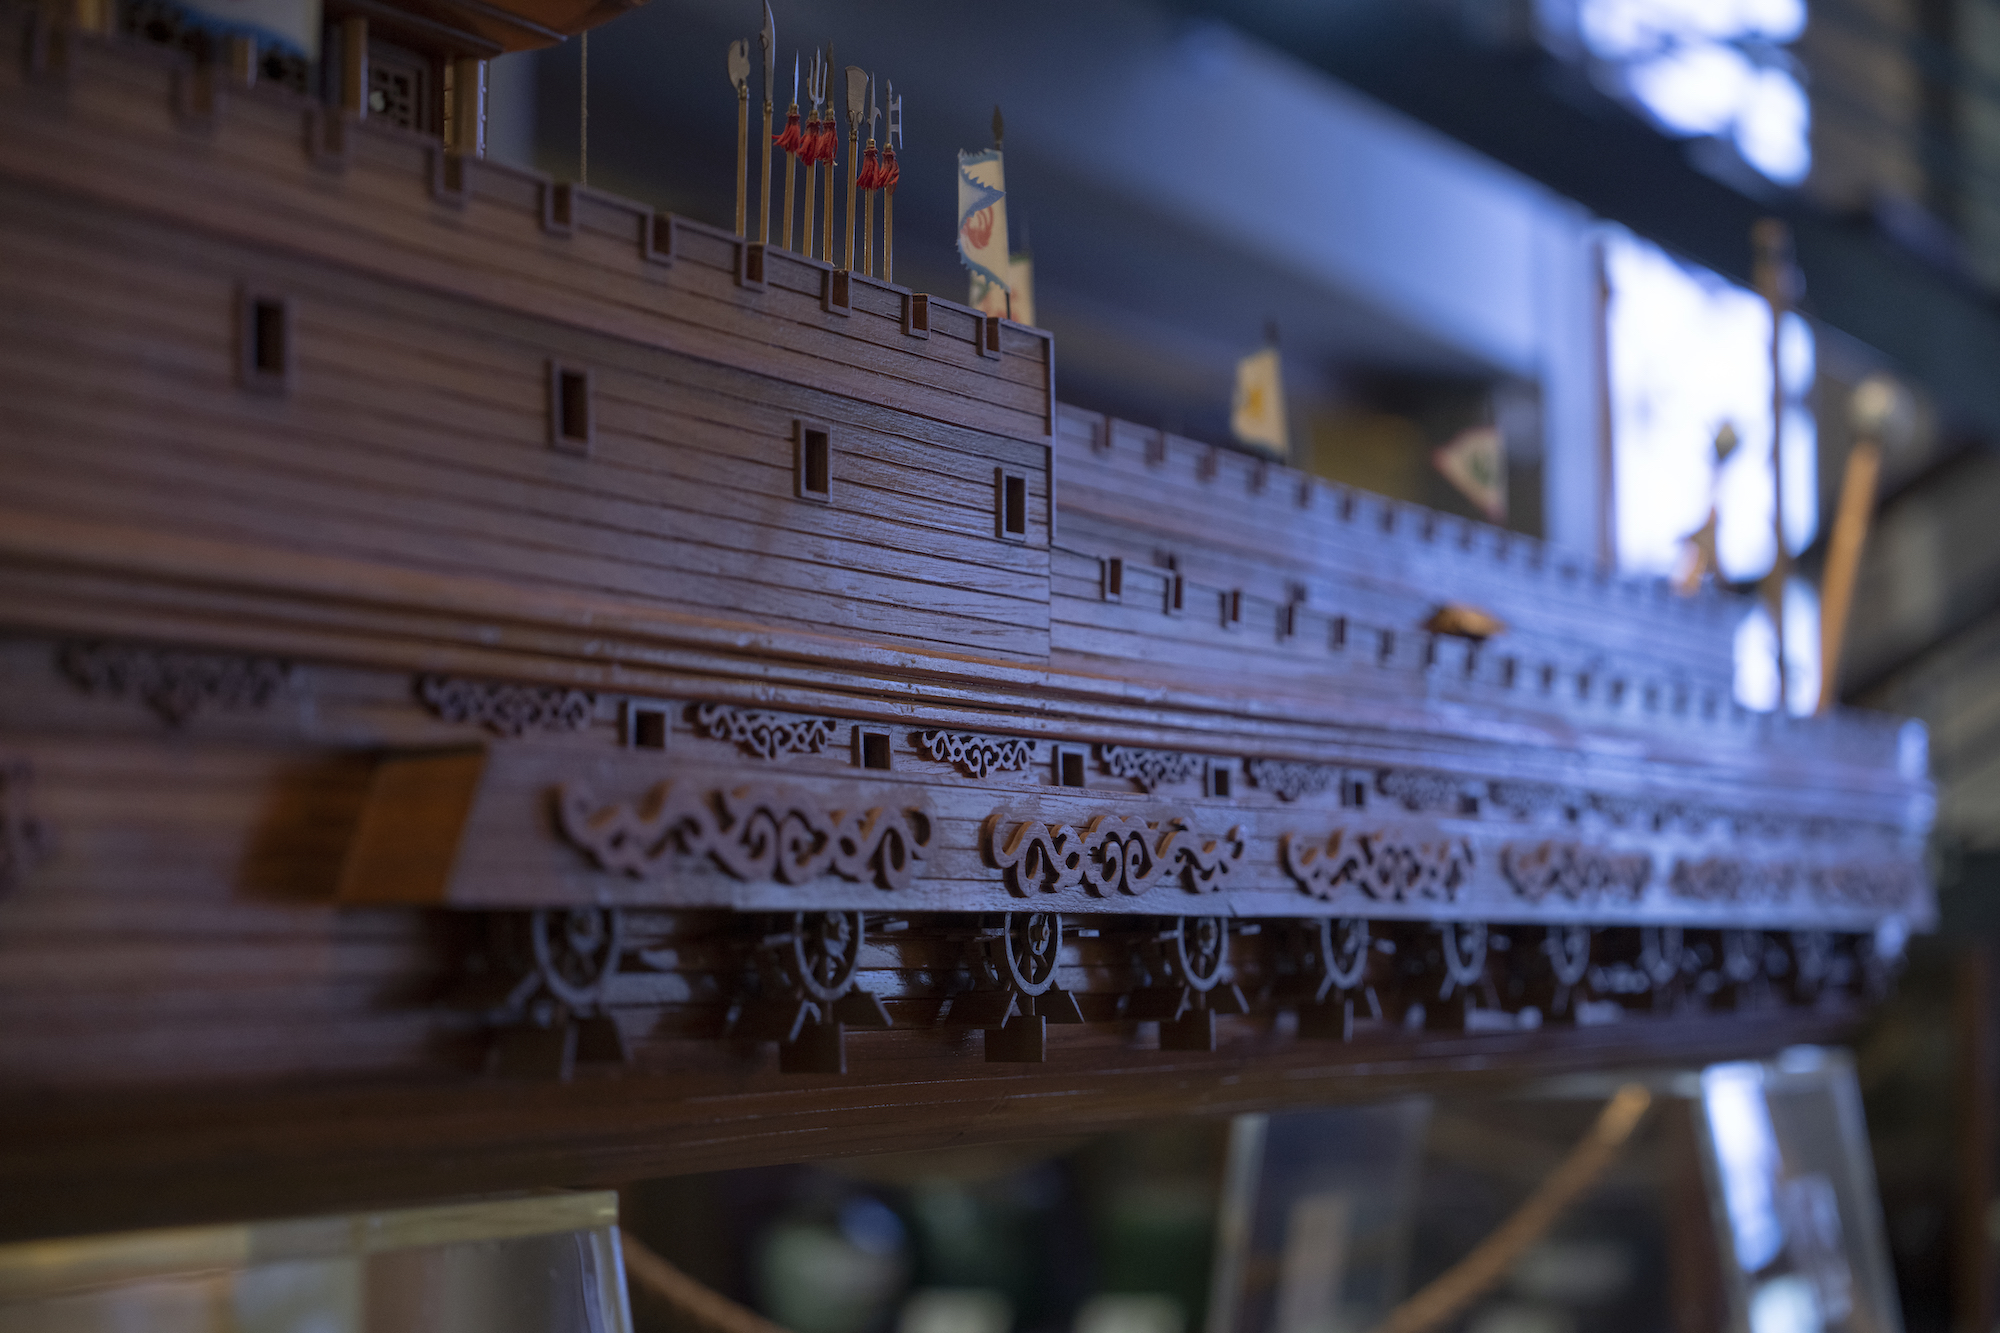 Macao Maritime Museum, from tiny scrollwork to a rack of weapons, such detail makes these tiny ship feel more real